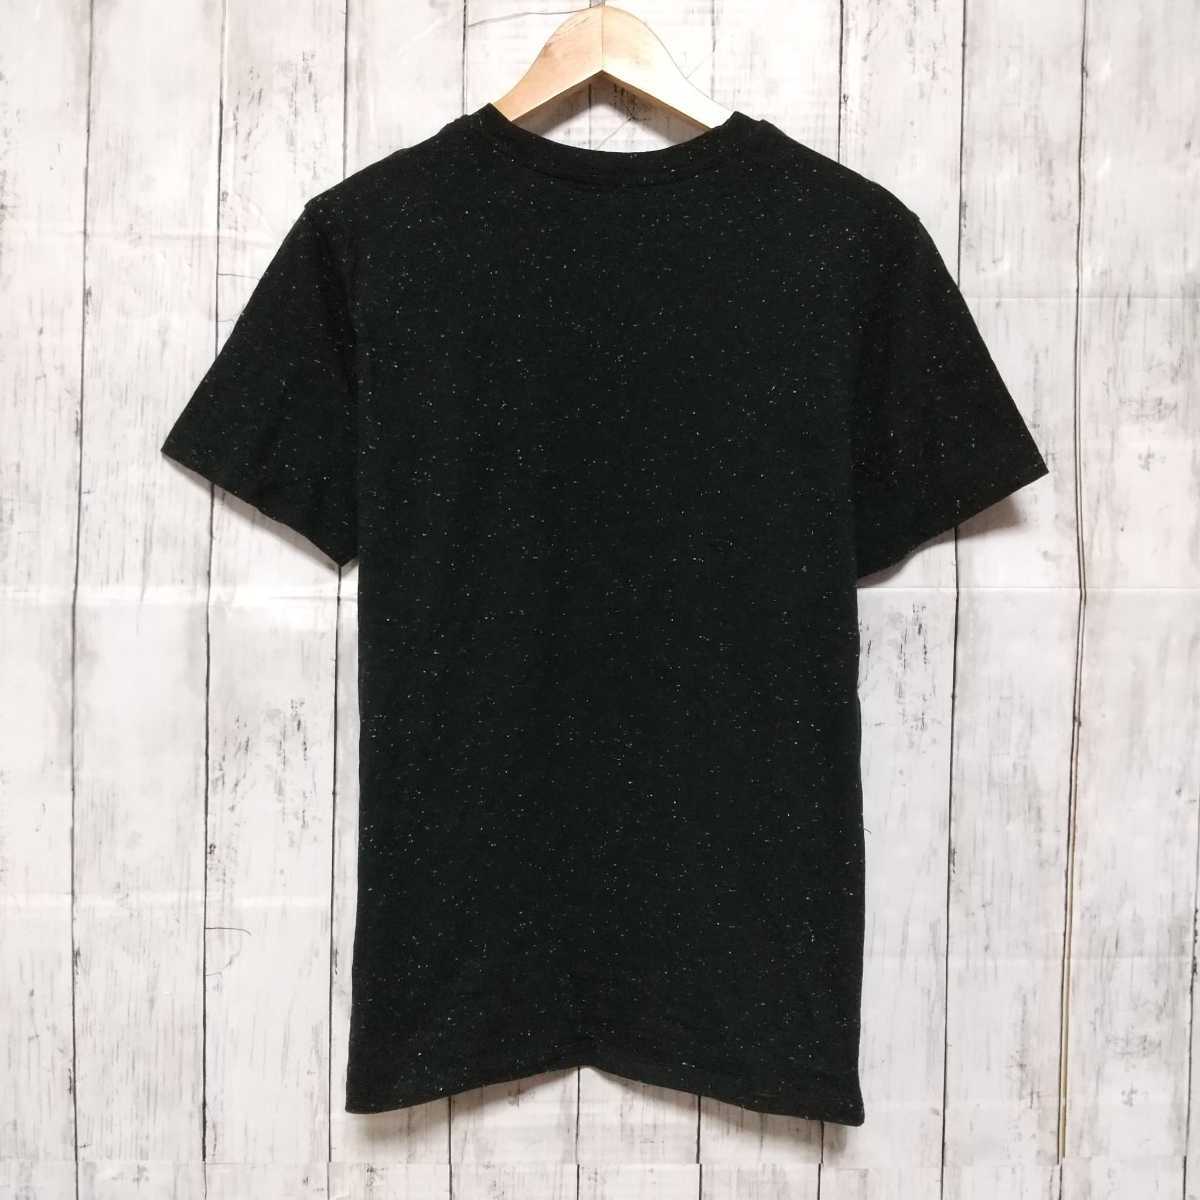 F2340UL*A.P.C. A.P.C. * size M short sleeves T-shirt T-shirt black lady's casual made in Japan old clothes Vintage simple Tee